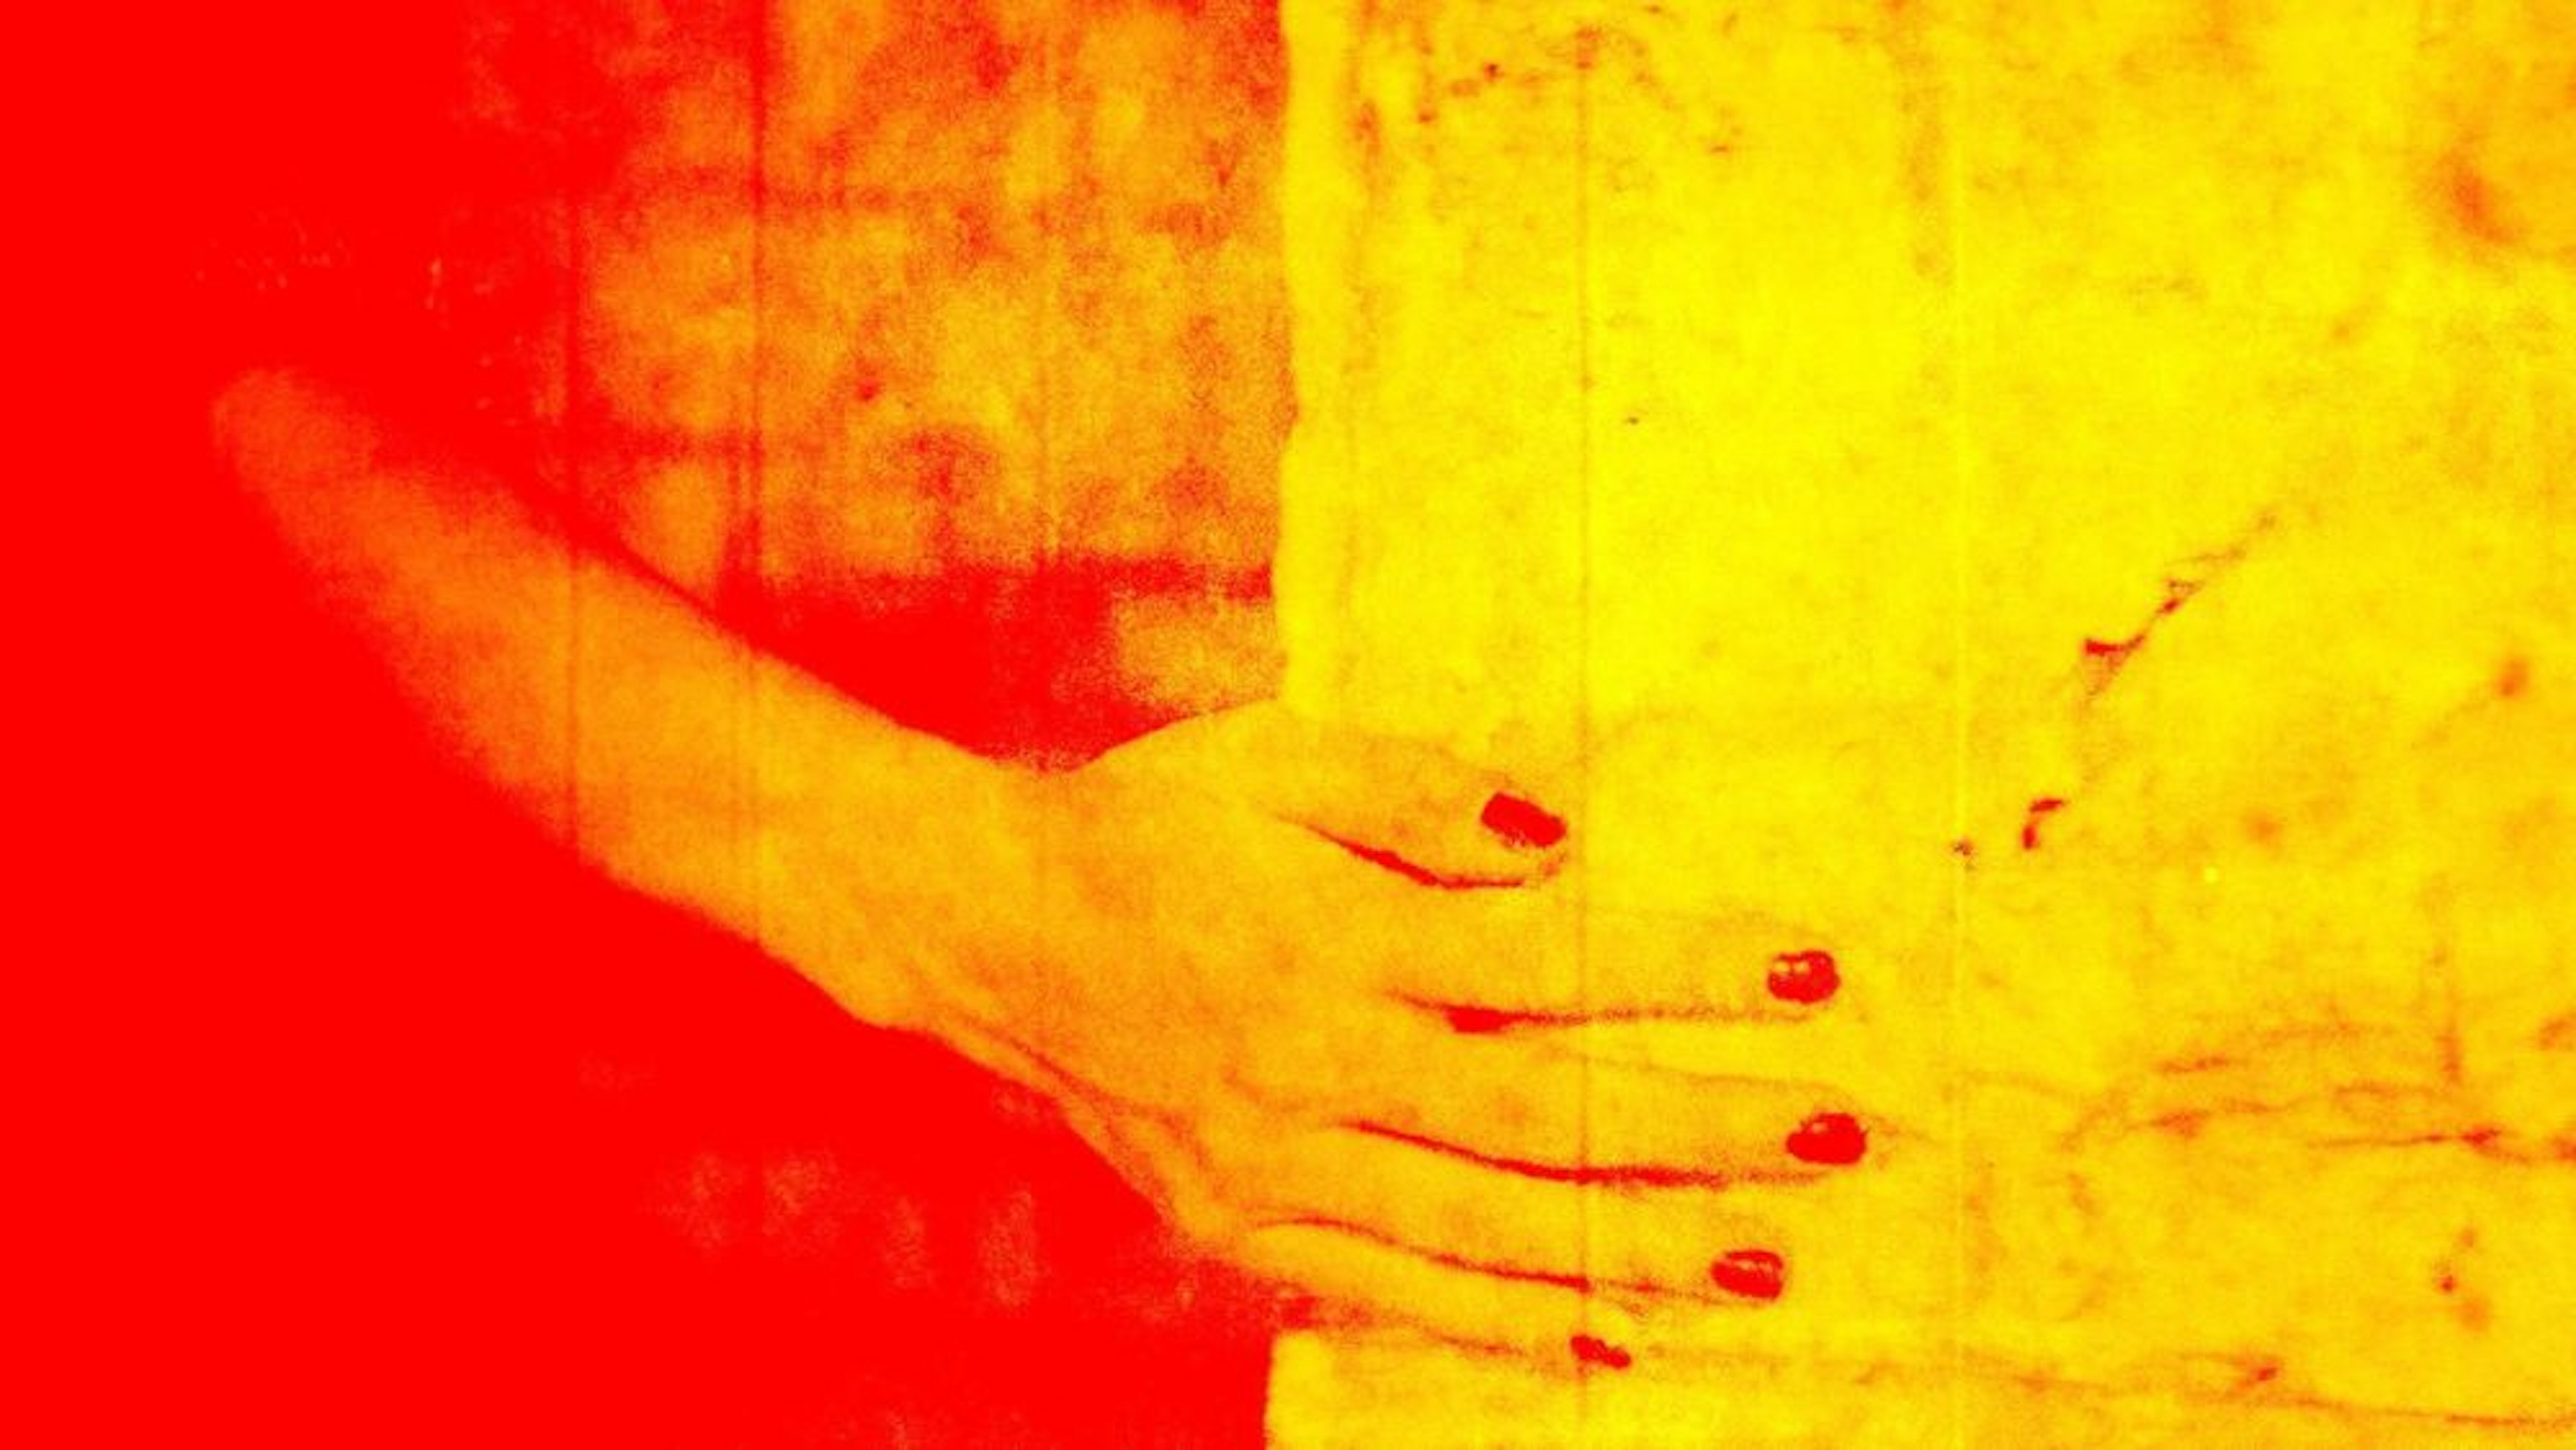 Close-up of a hand with pained nails gently caressing the edge of a wall. The image is tined in saturated red and yellow color.